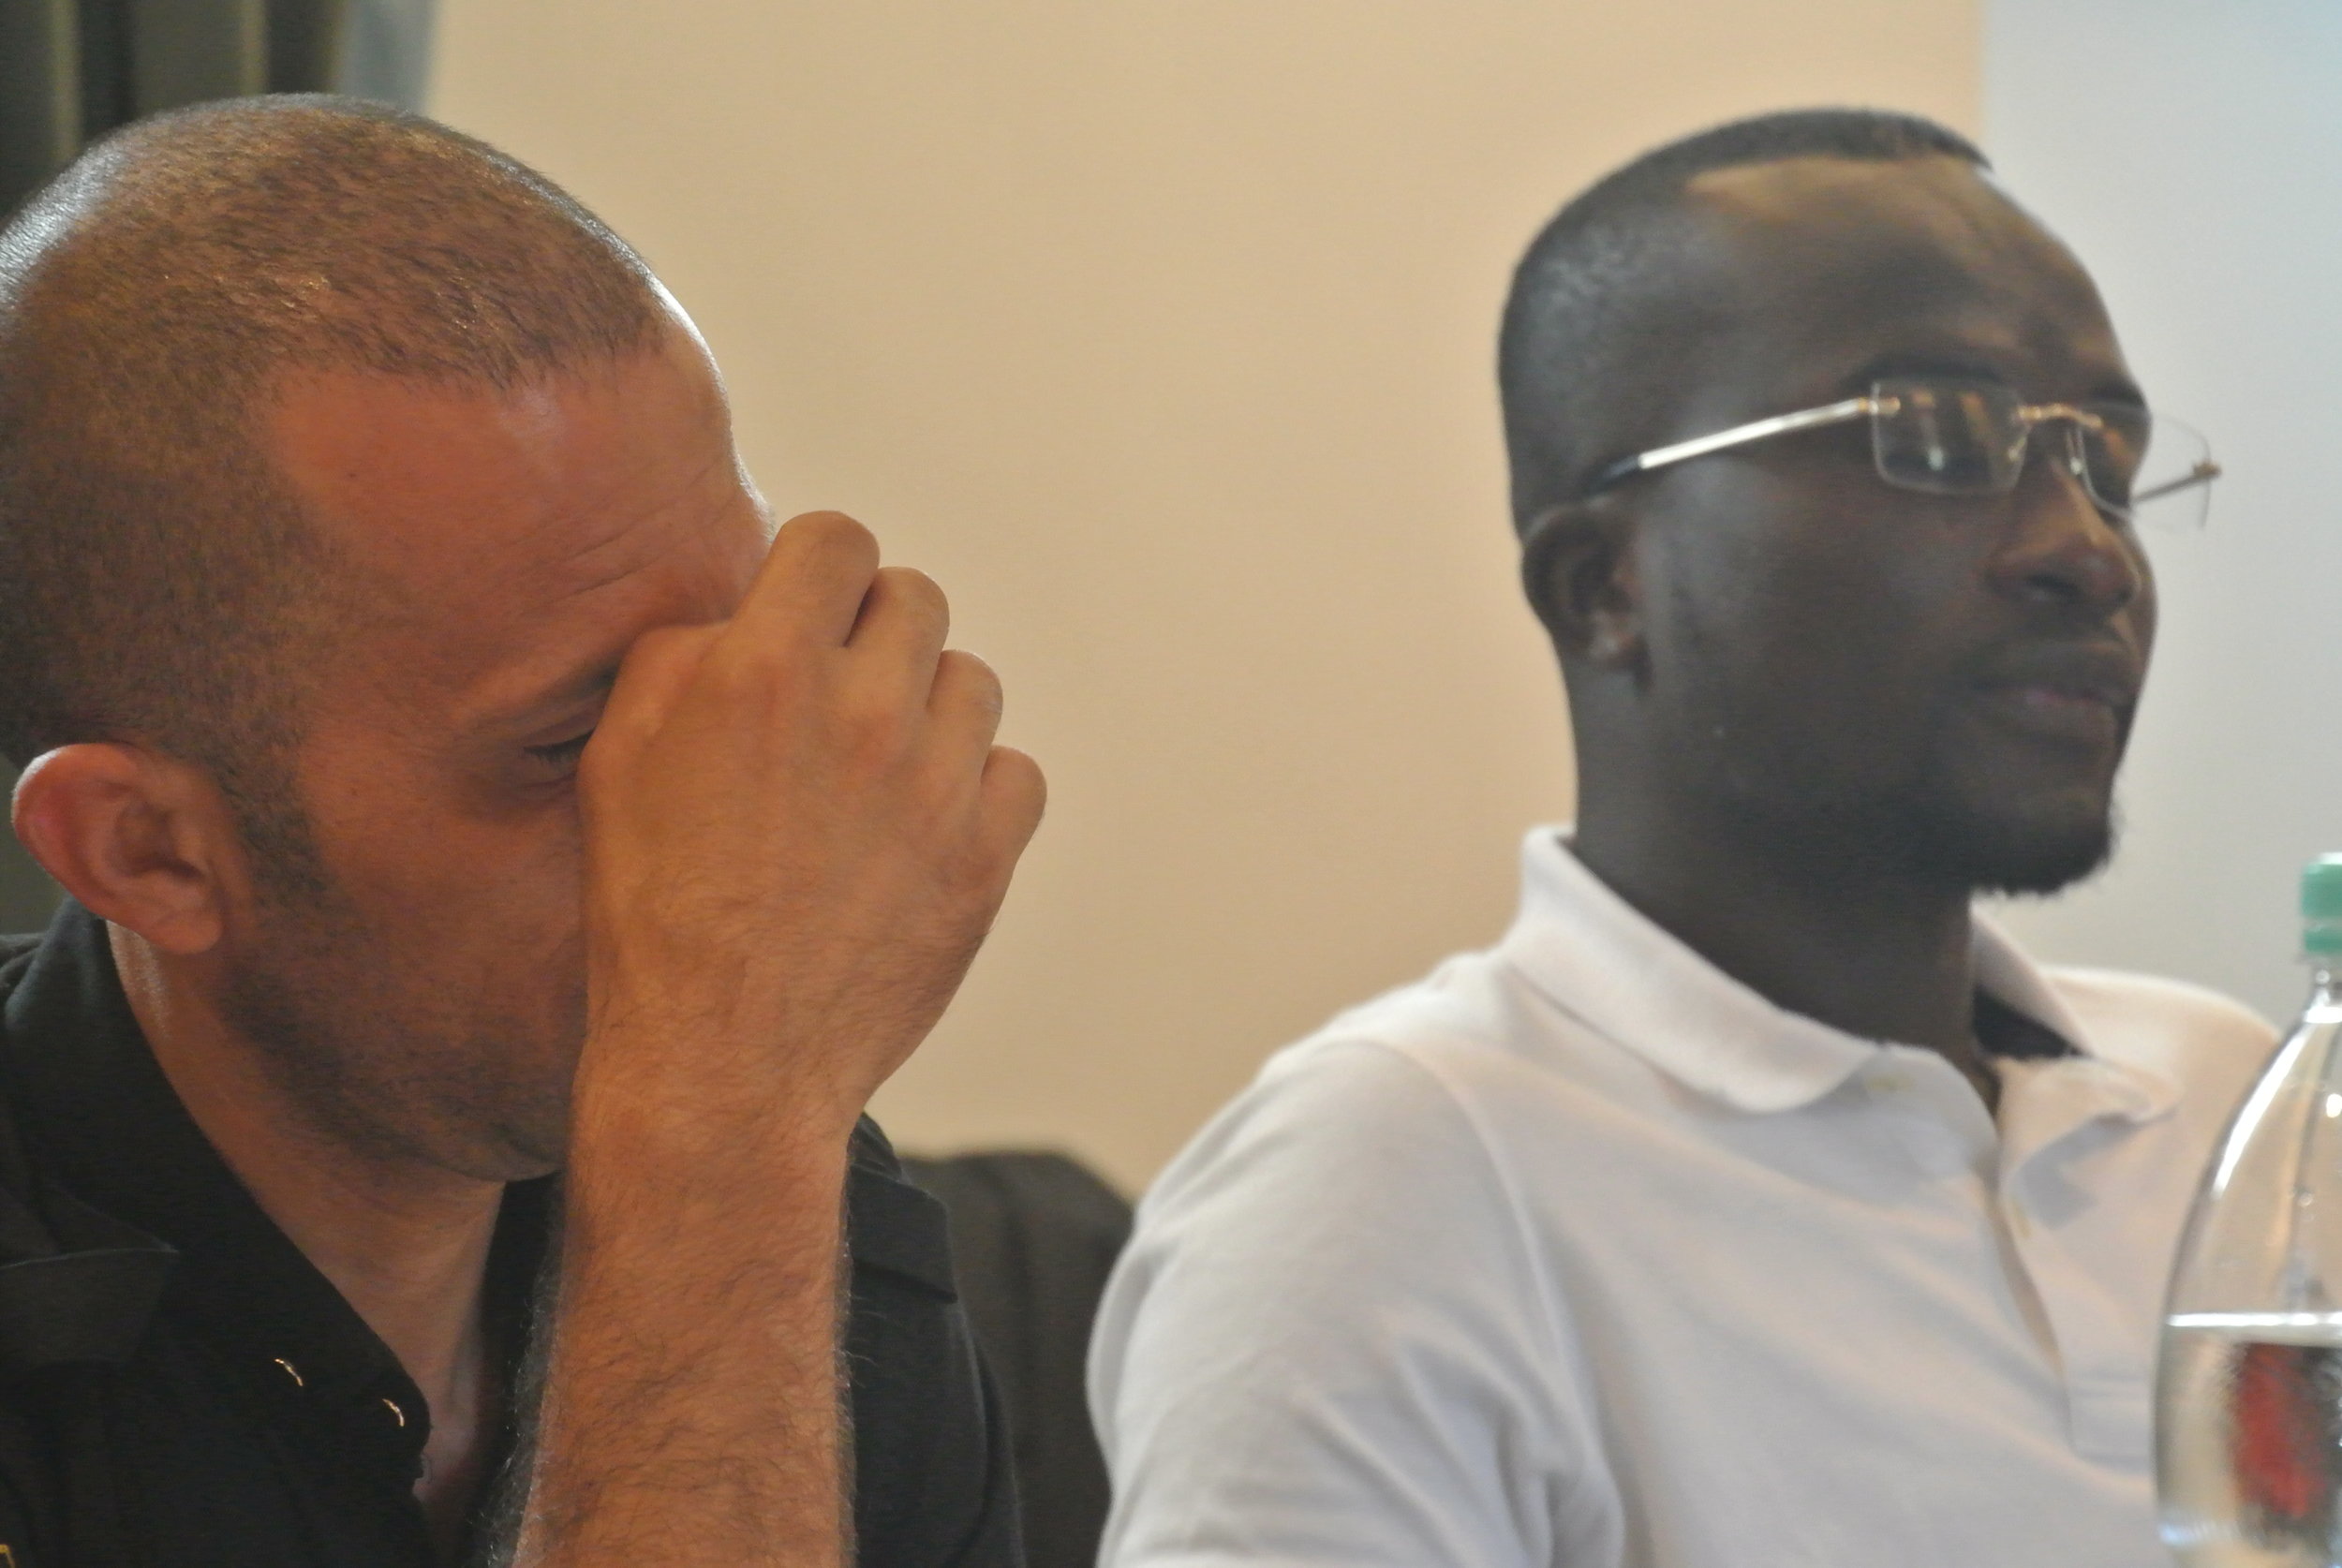  Walid grips his brow while listening to Bakary. The Embassy of Switzerland, Rome. 11 June 2018. 